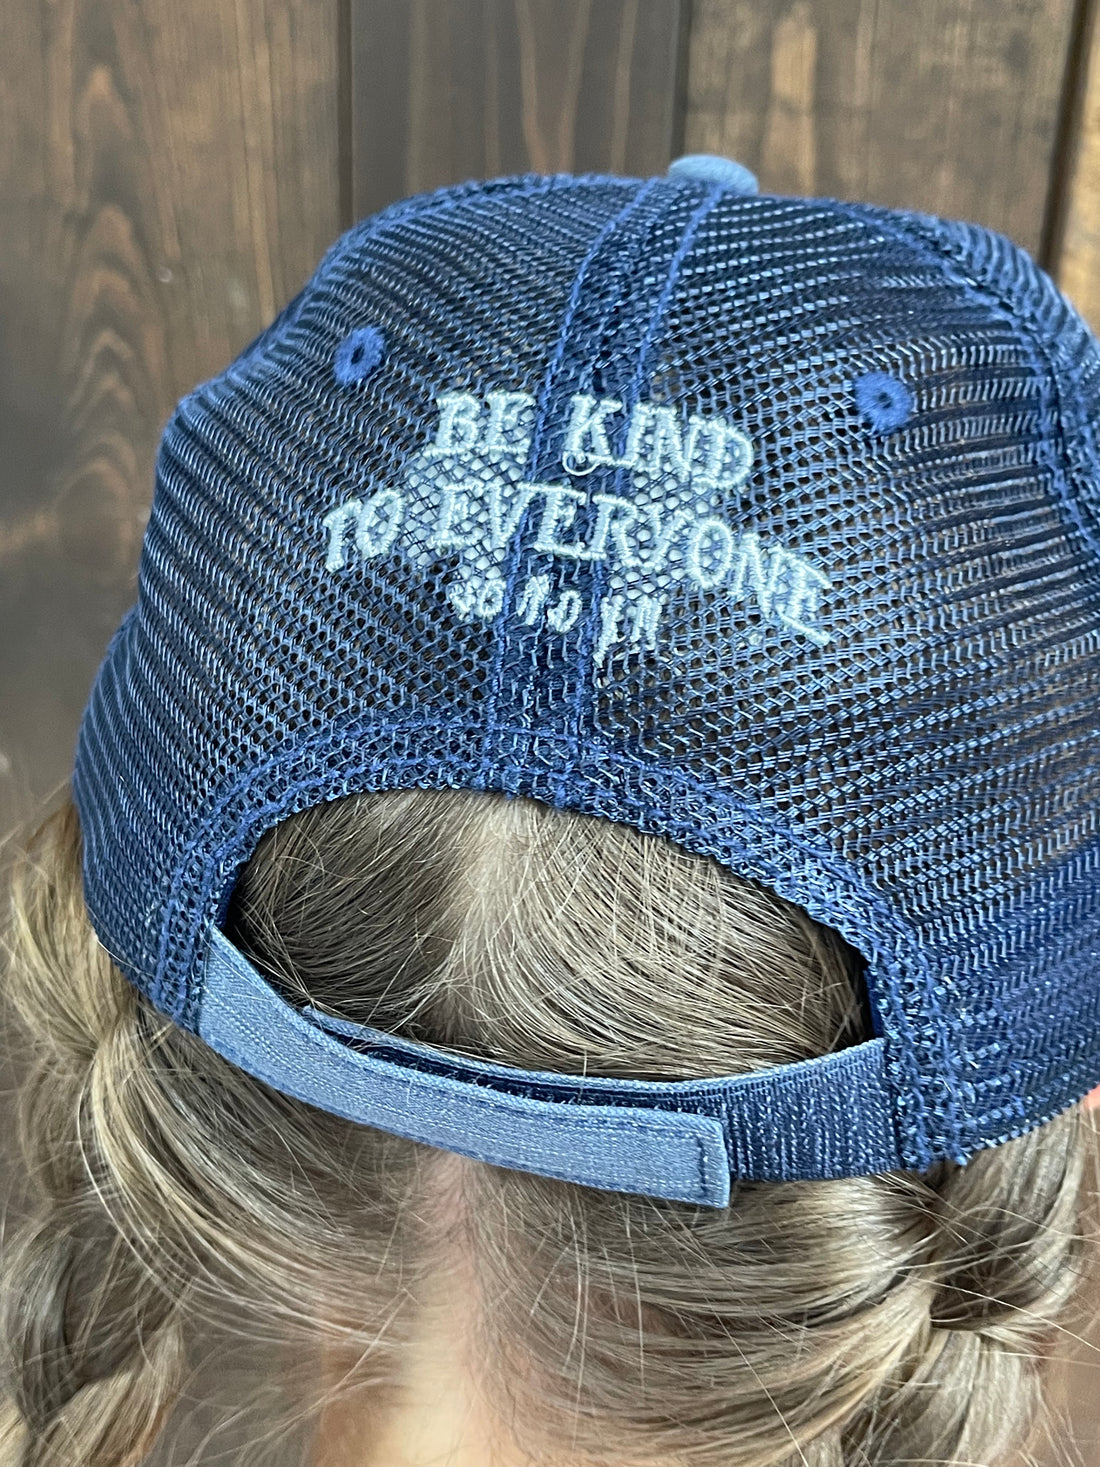 Wrinkled Mess Club Hat: The unstructured mesh back is embroidered with Be Kind to Everyone® and Jordyn&